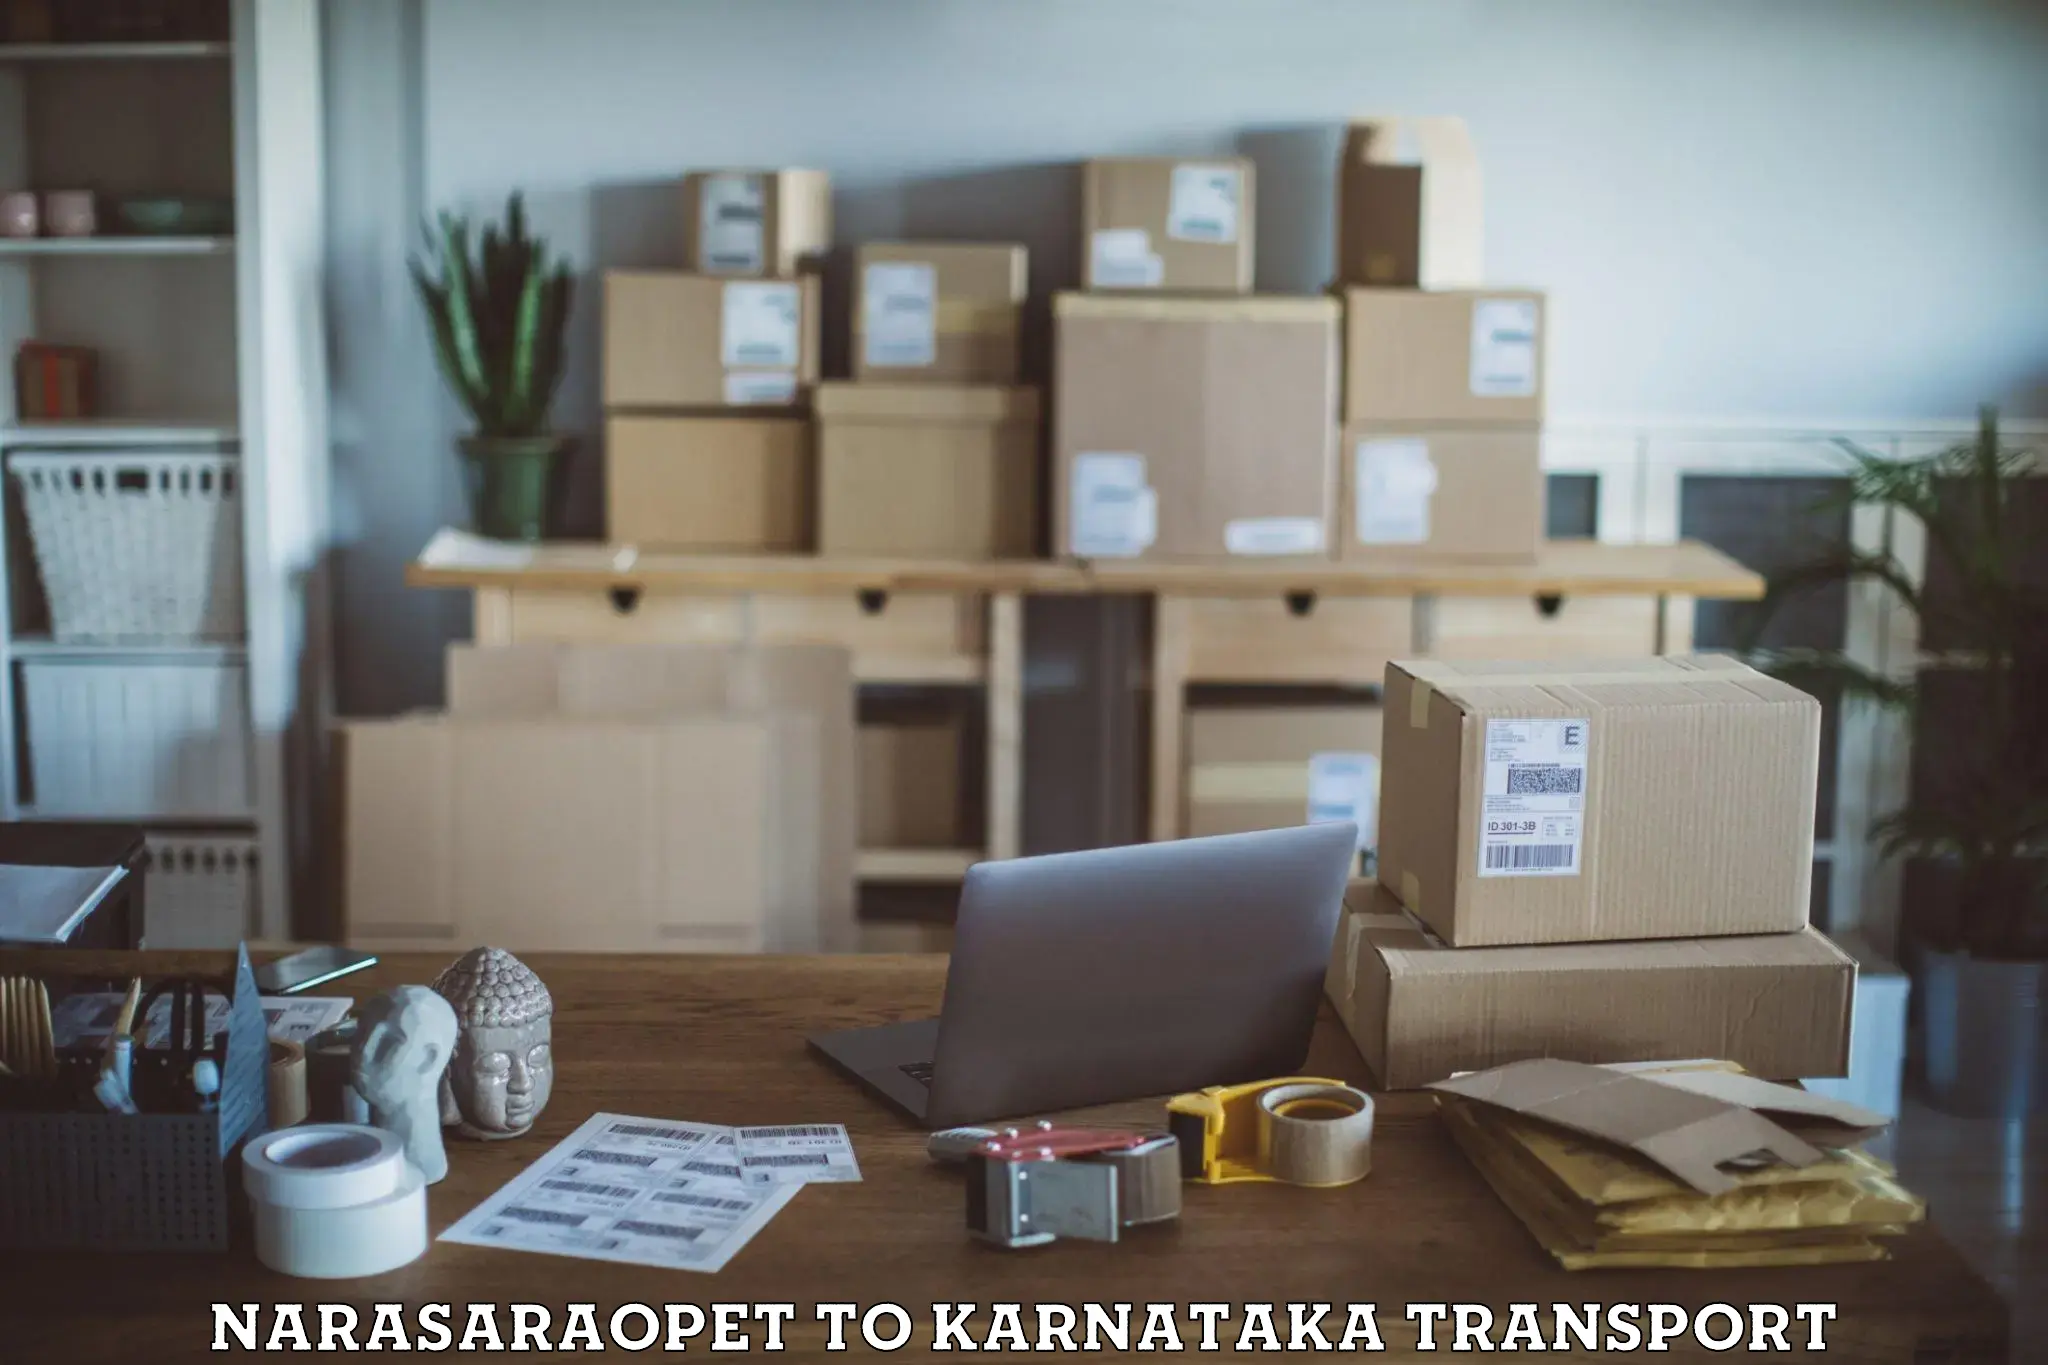 Truck transport companies in India Narasaraopet to Manipal